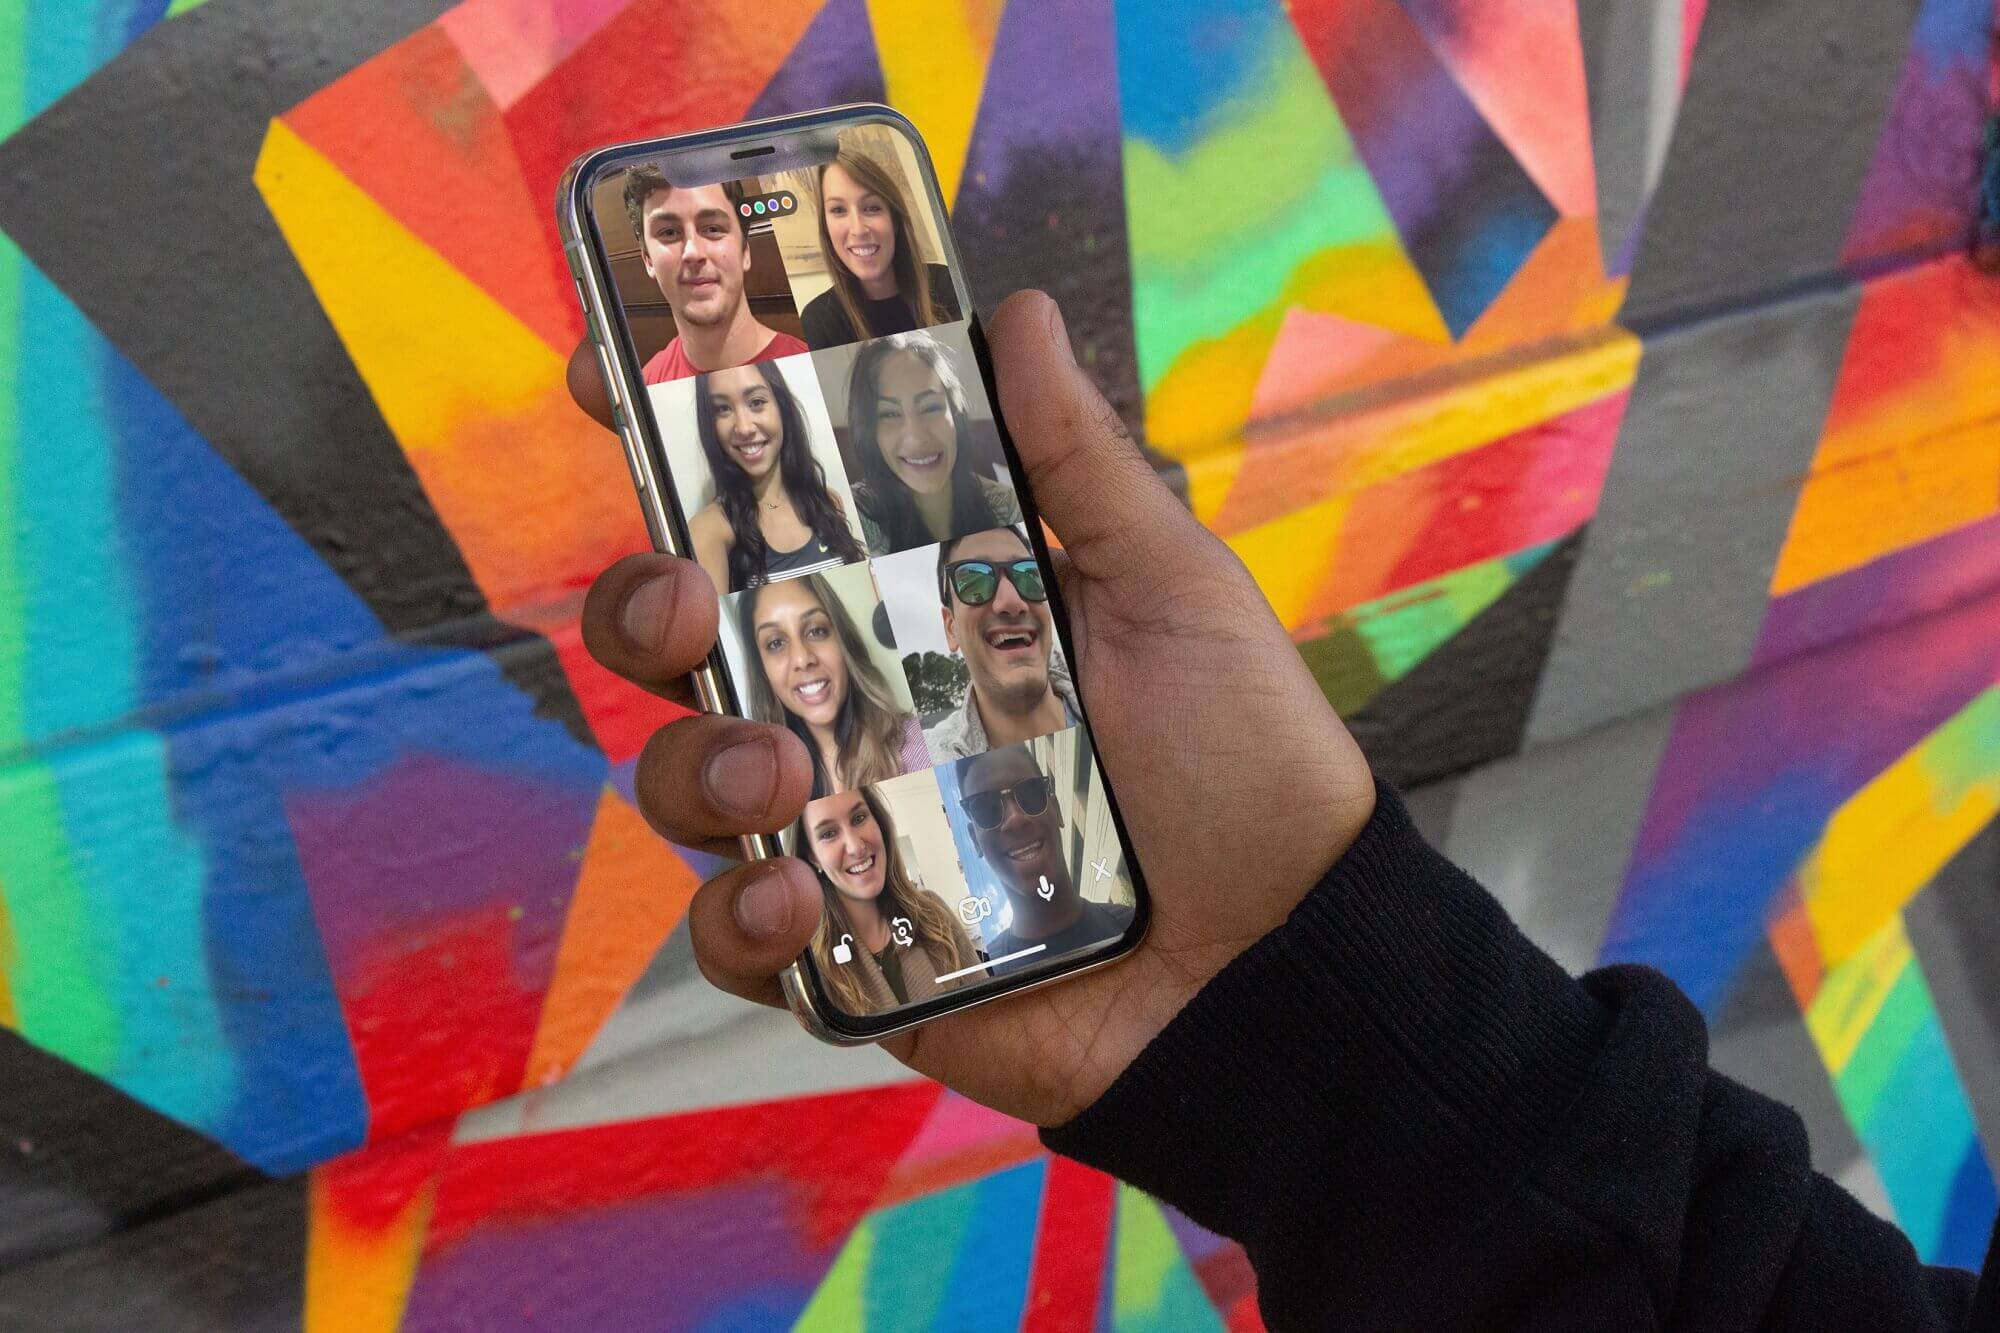 Houseparty added 50 million new users in the past month